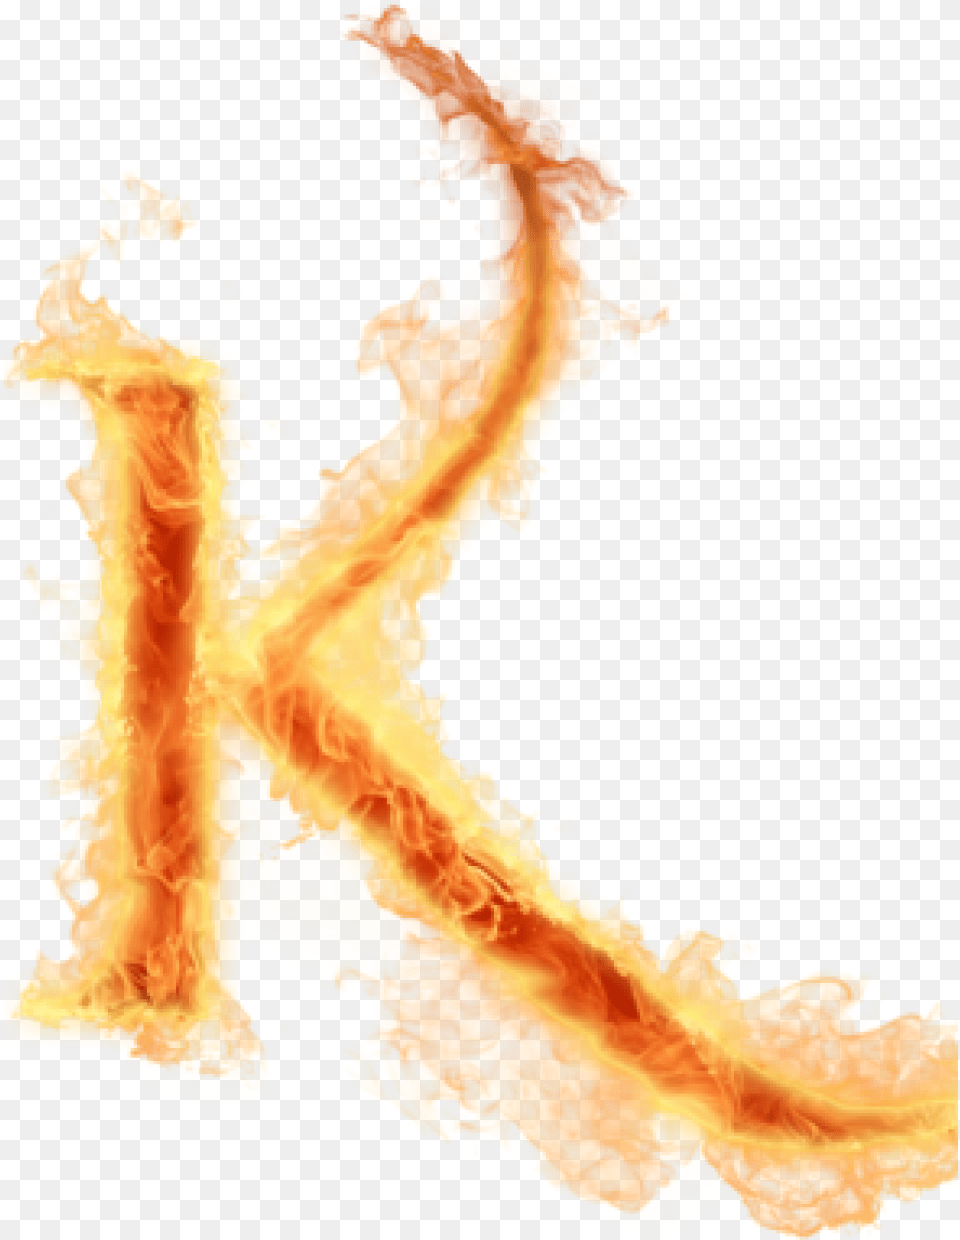 Download K Alphabet Hq Image In Fire Letter K, Flame, Person Free Png